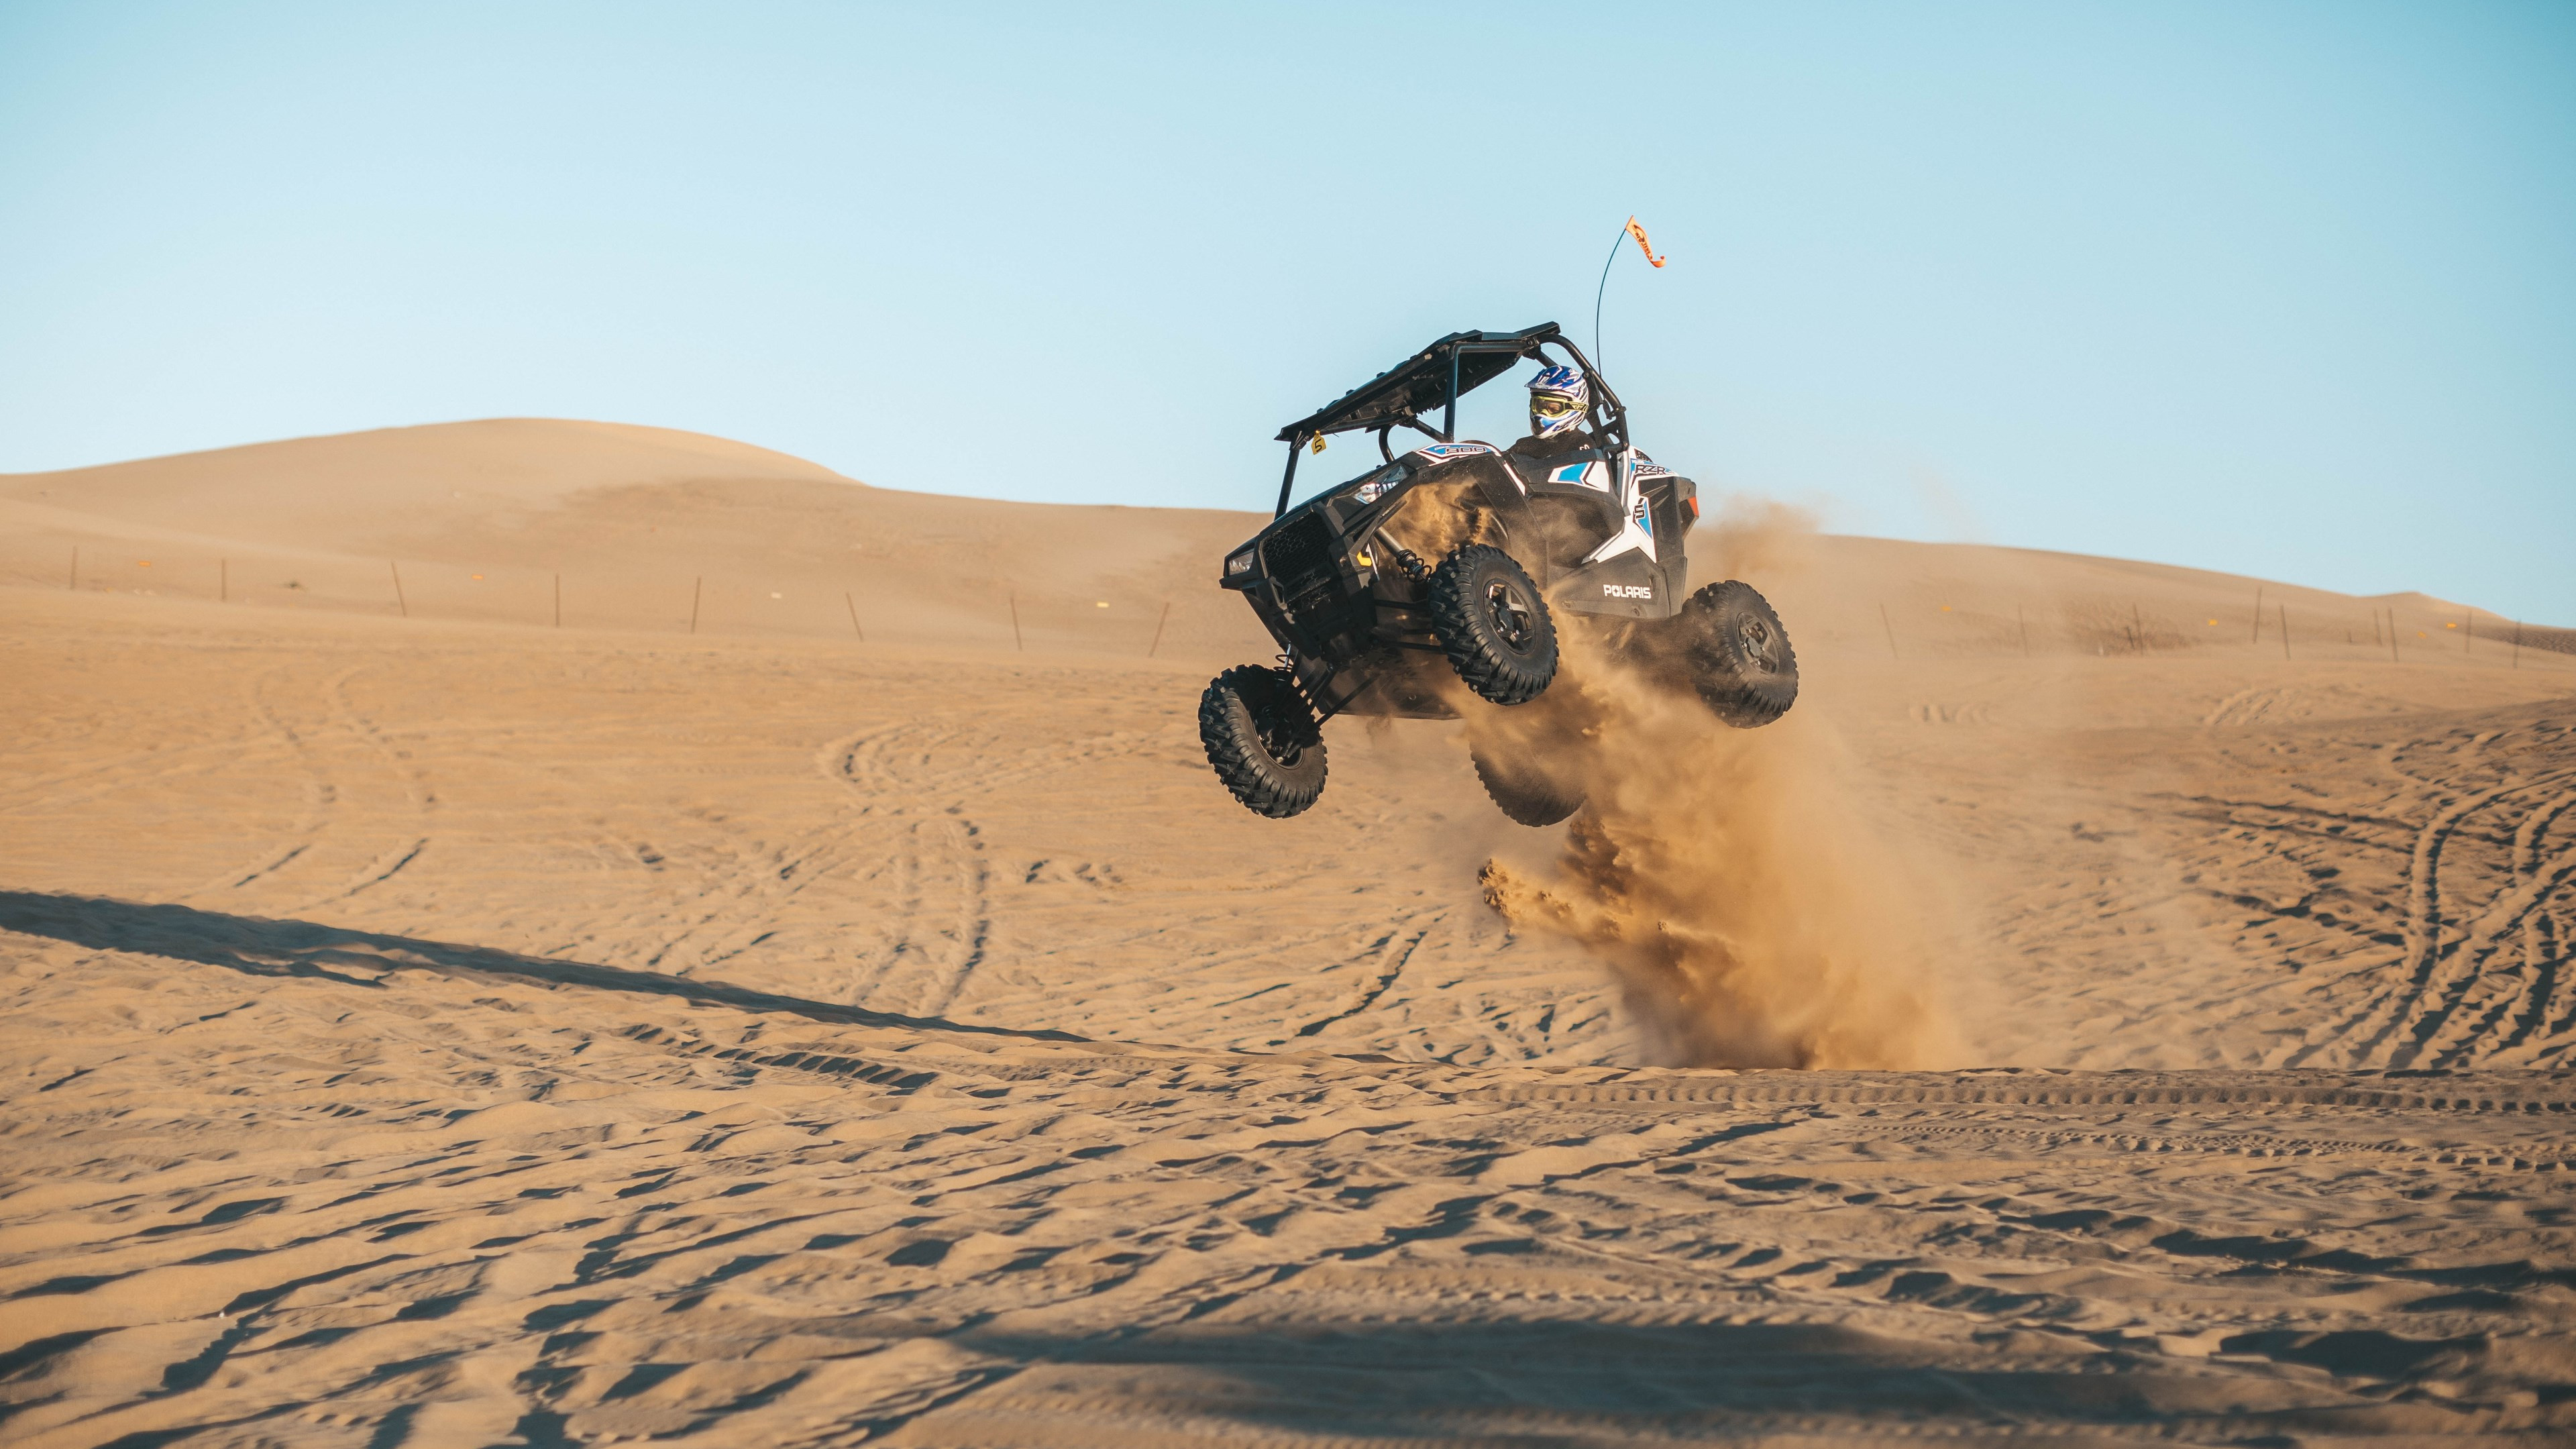 With ATV on the the sand dunes wallpaper 3840x2160